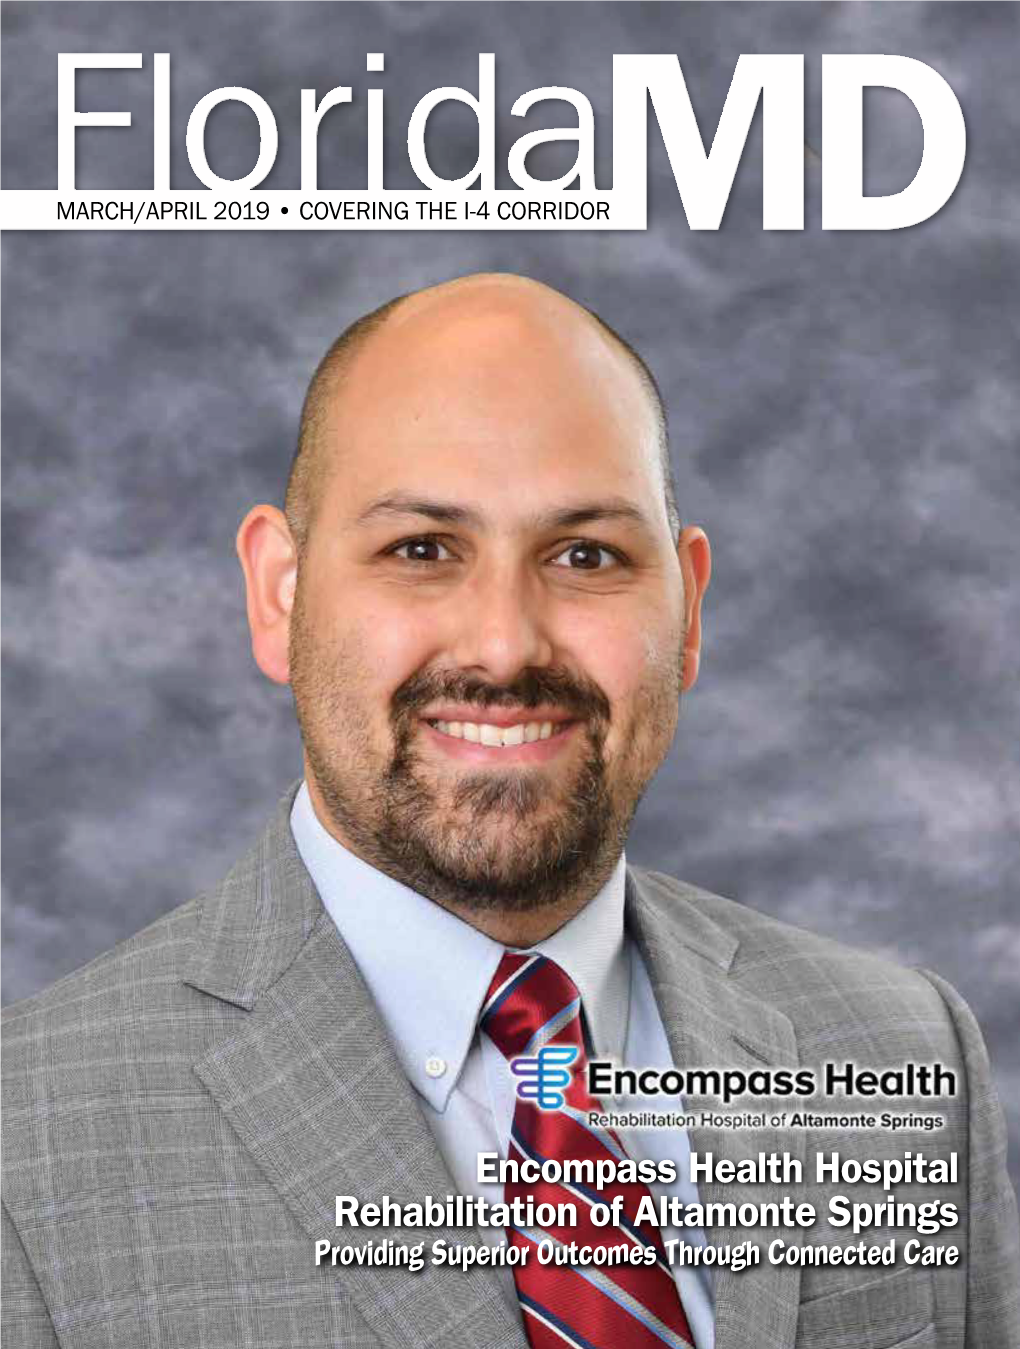 Encompass Health Hospital Rehabilitation of Altamonte Springs Providing Superior Outcomes Through Connected Care Choose a Leader in Cancer Treatment